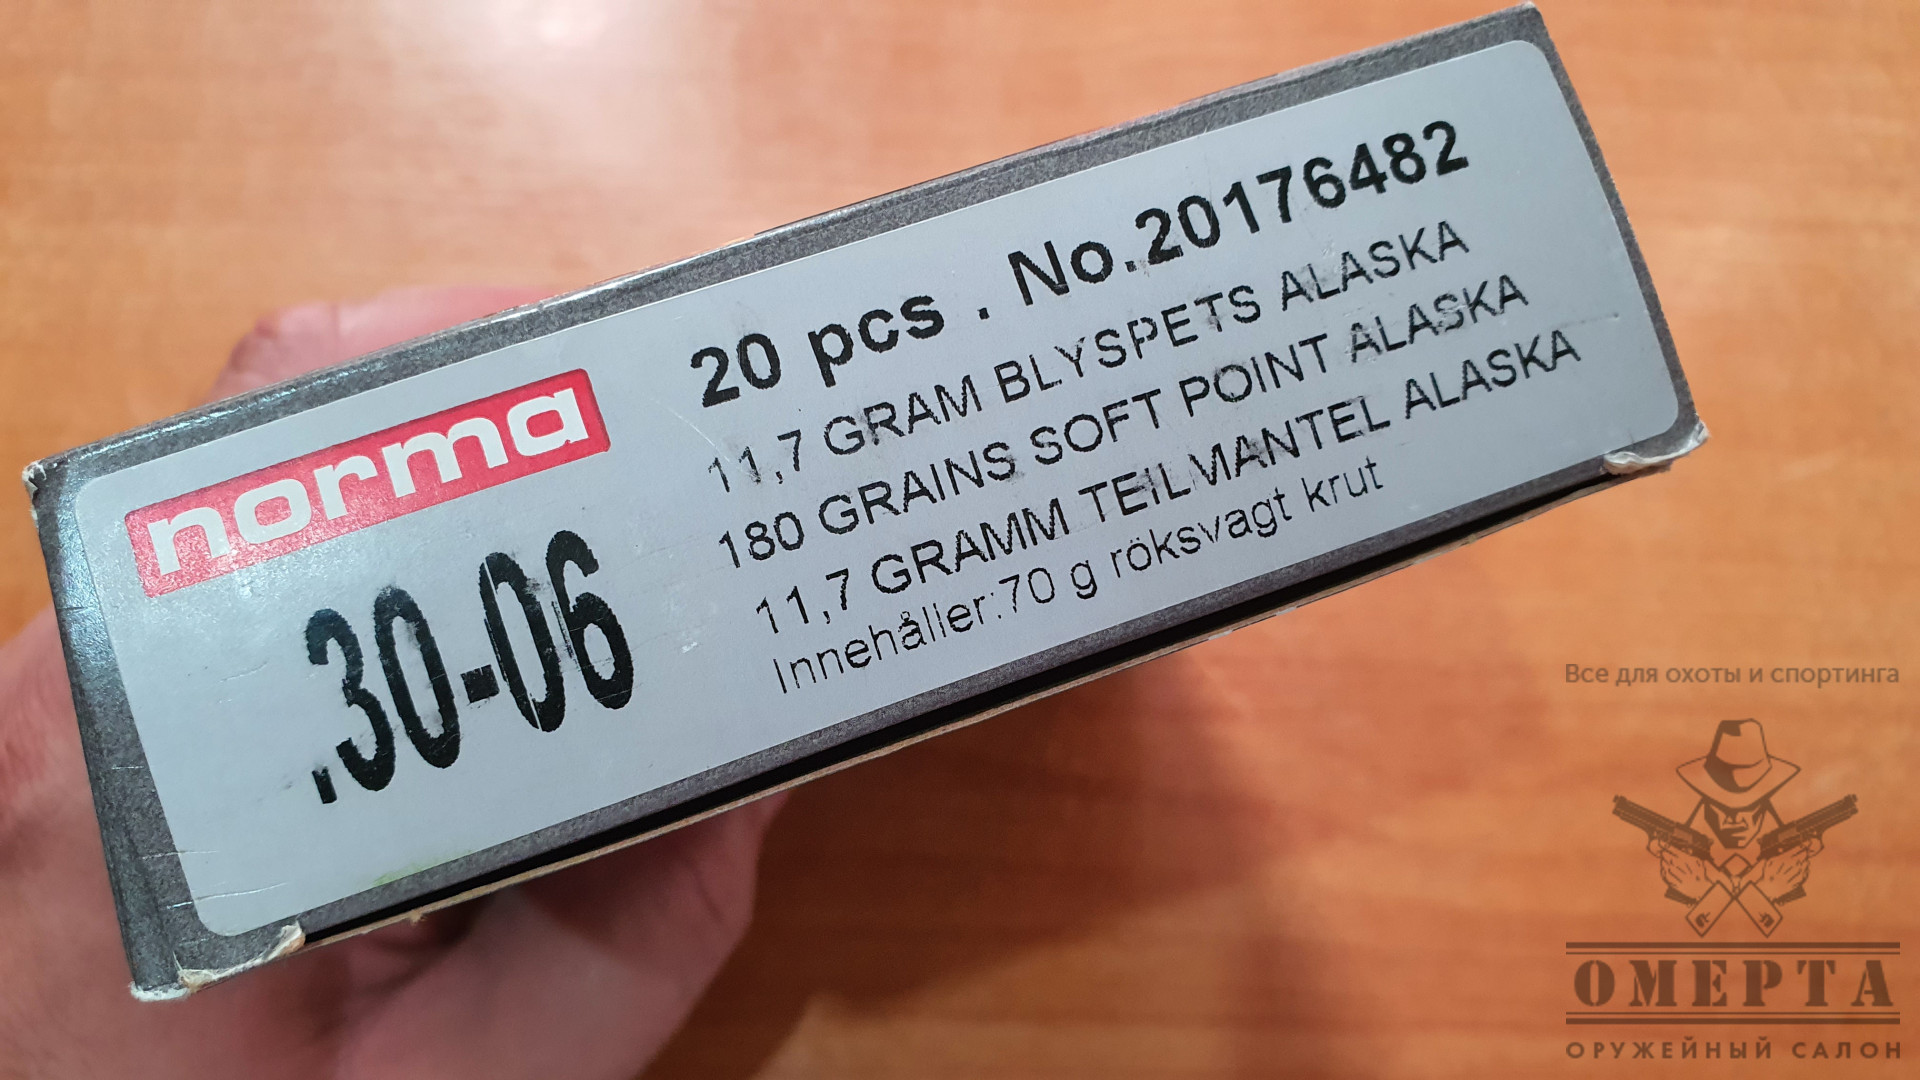 NORMA 30-06, 11.7g